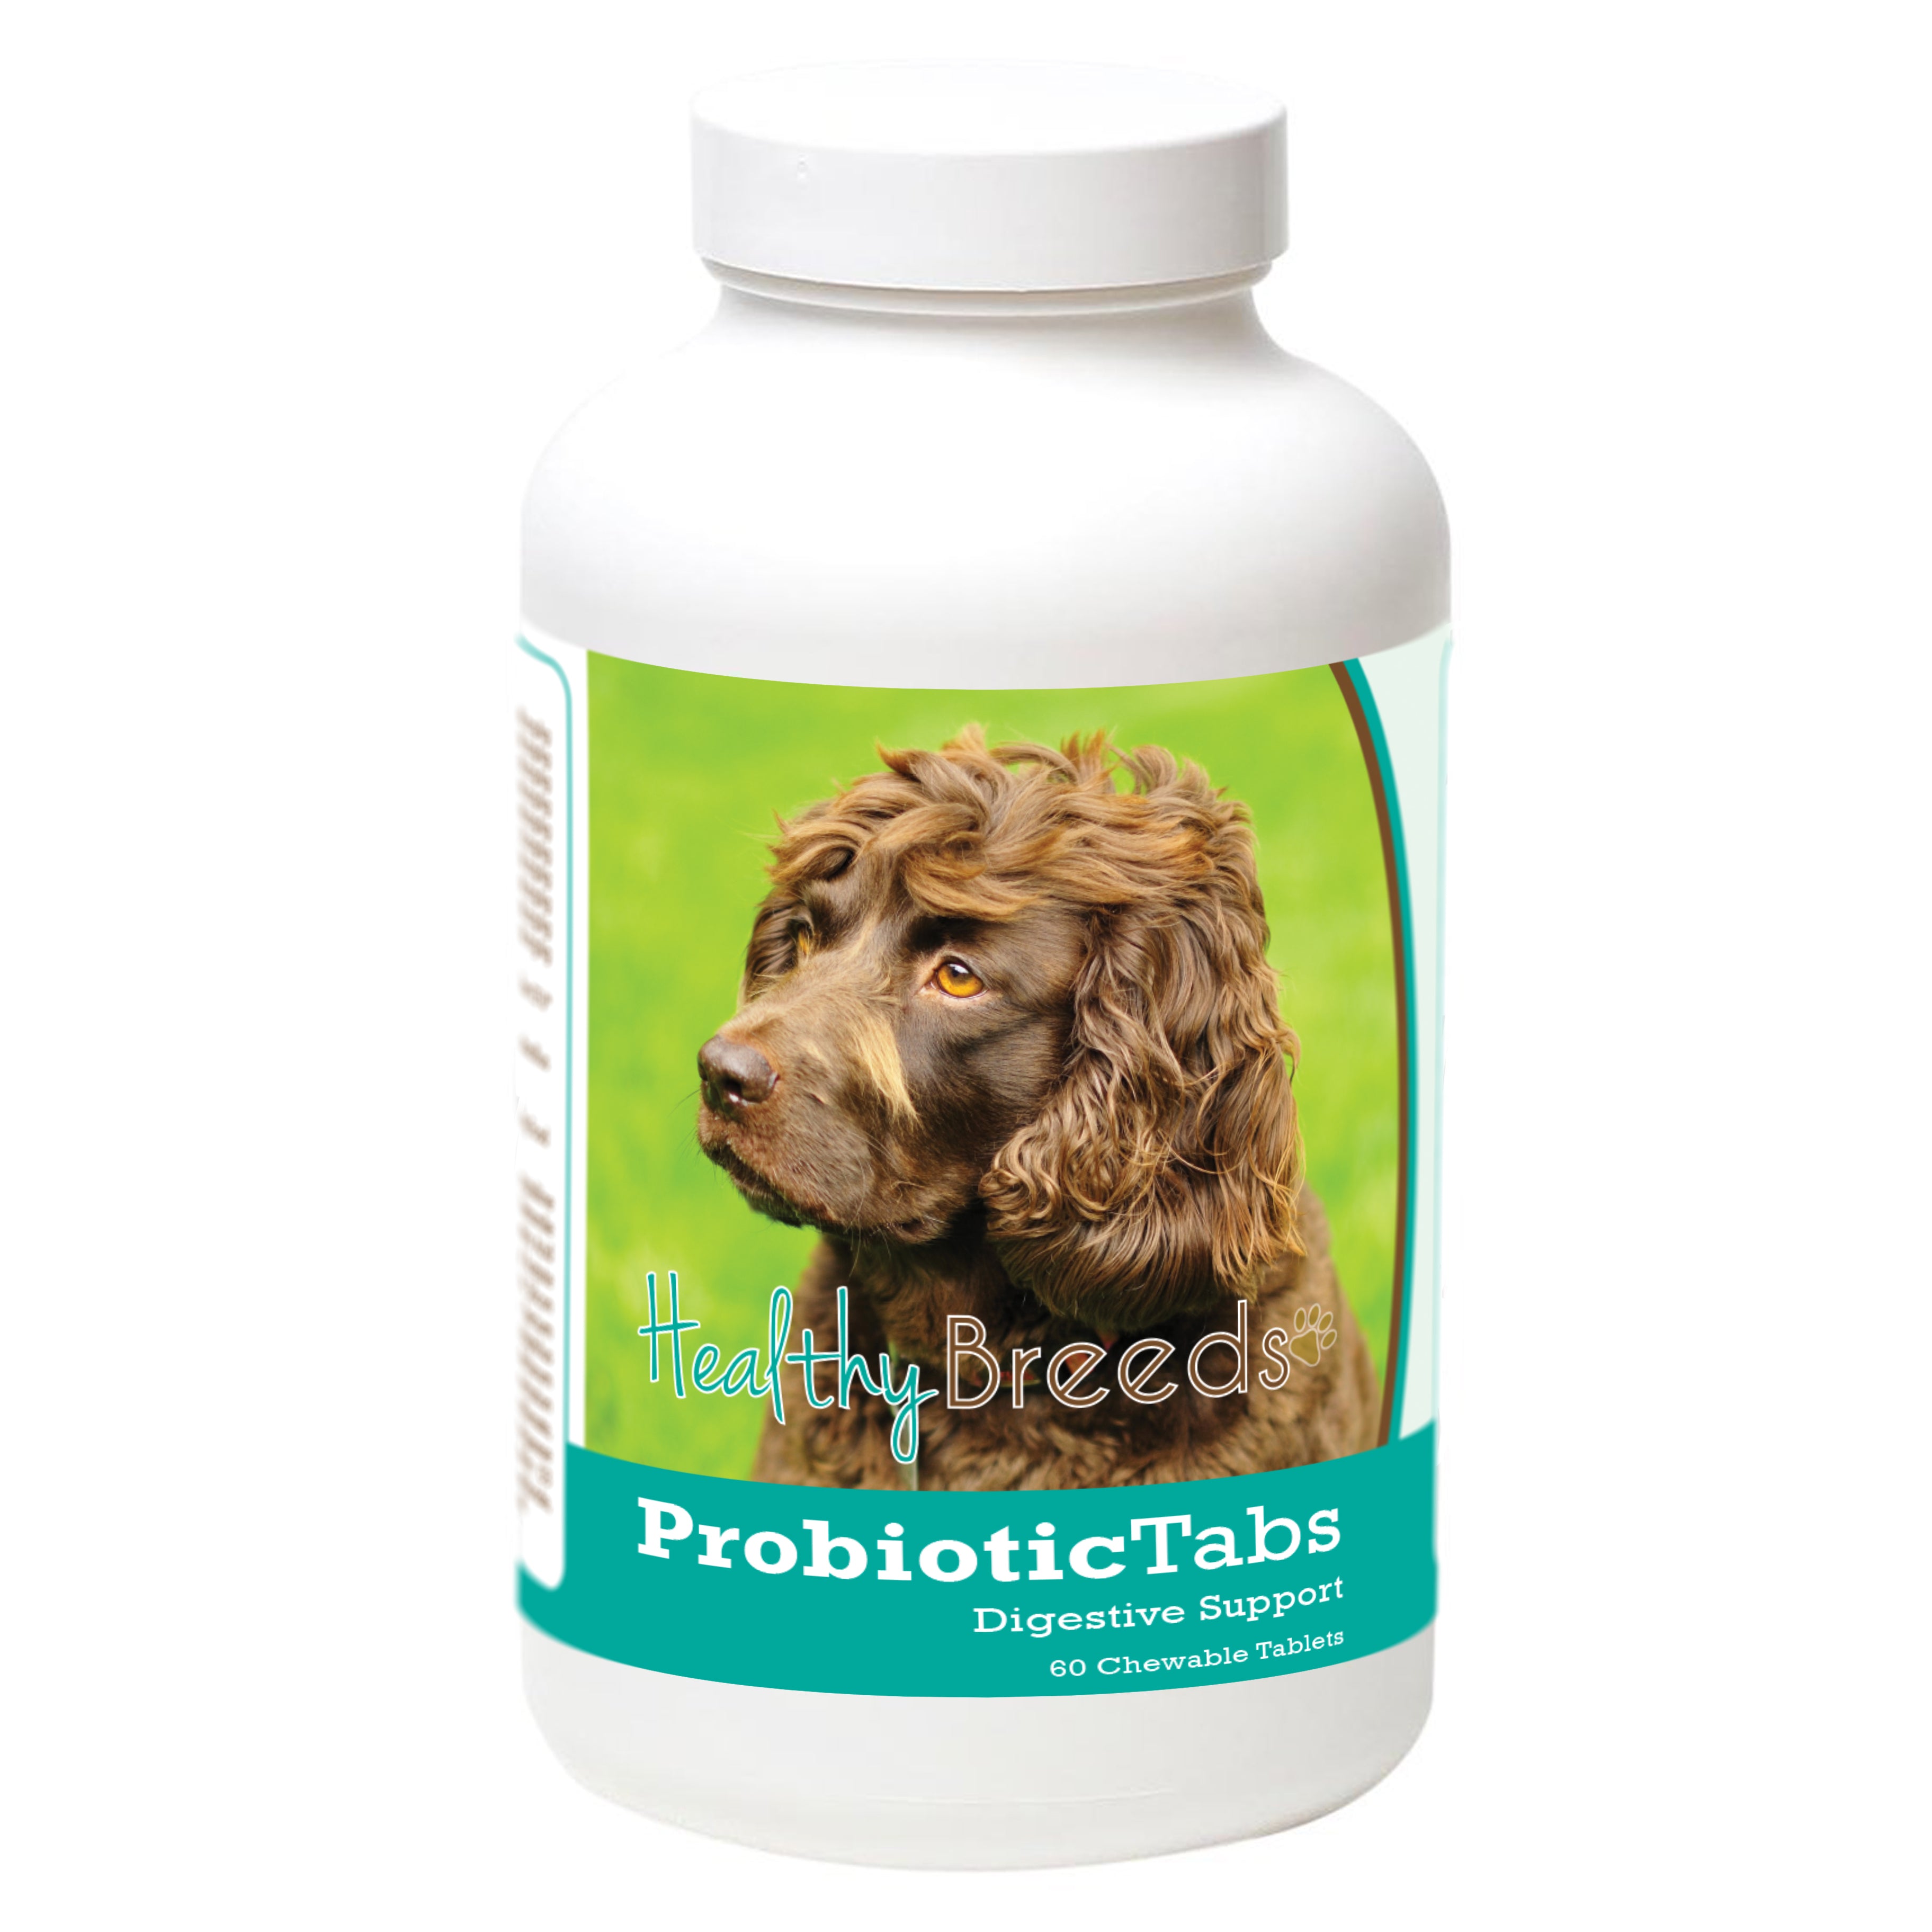 Boykin Spaniel Probiotic and Digestive Support for Dogs 60 Count